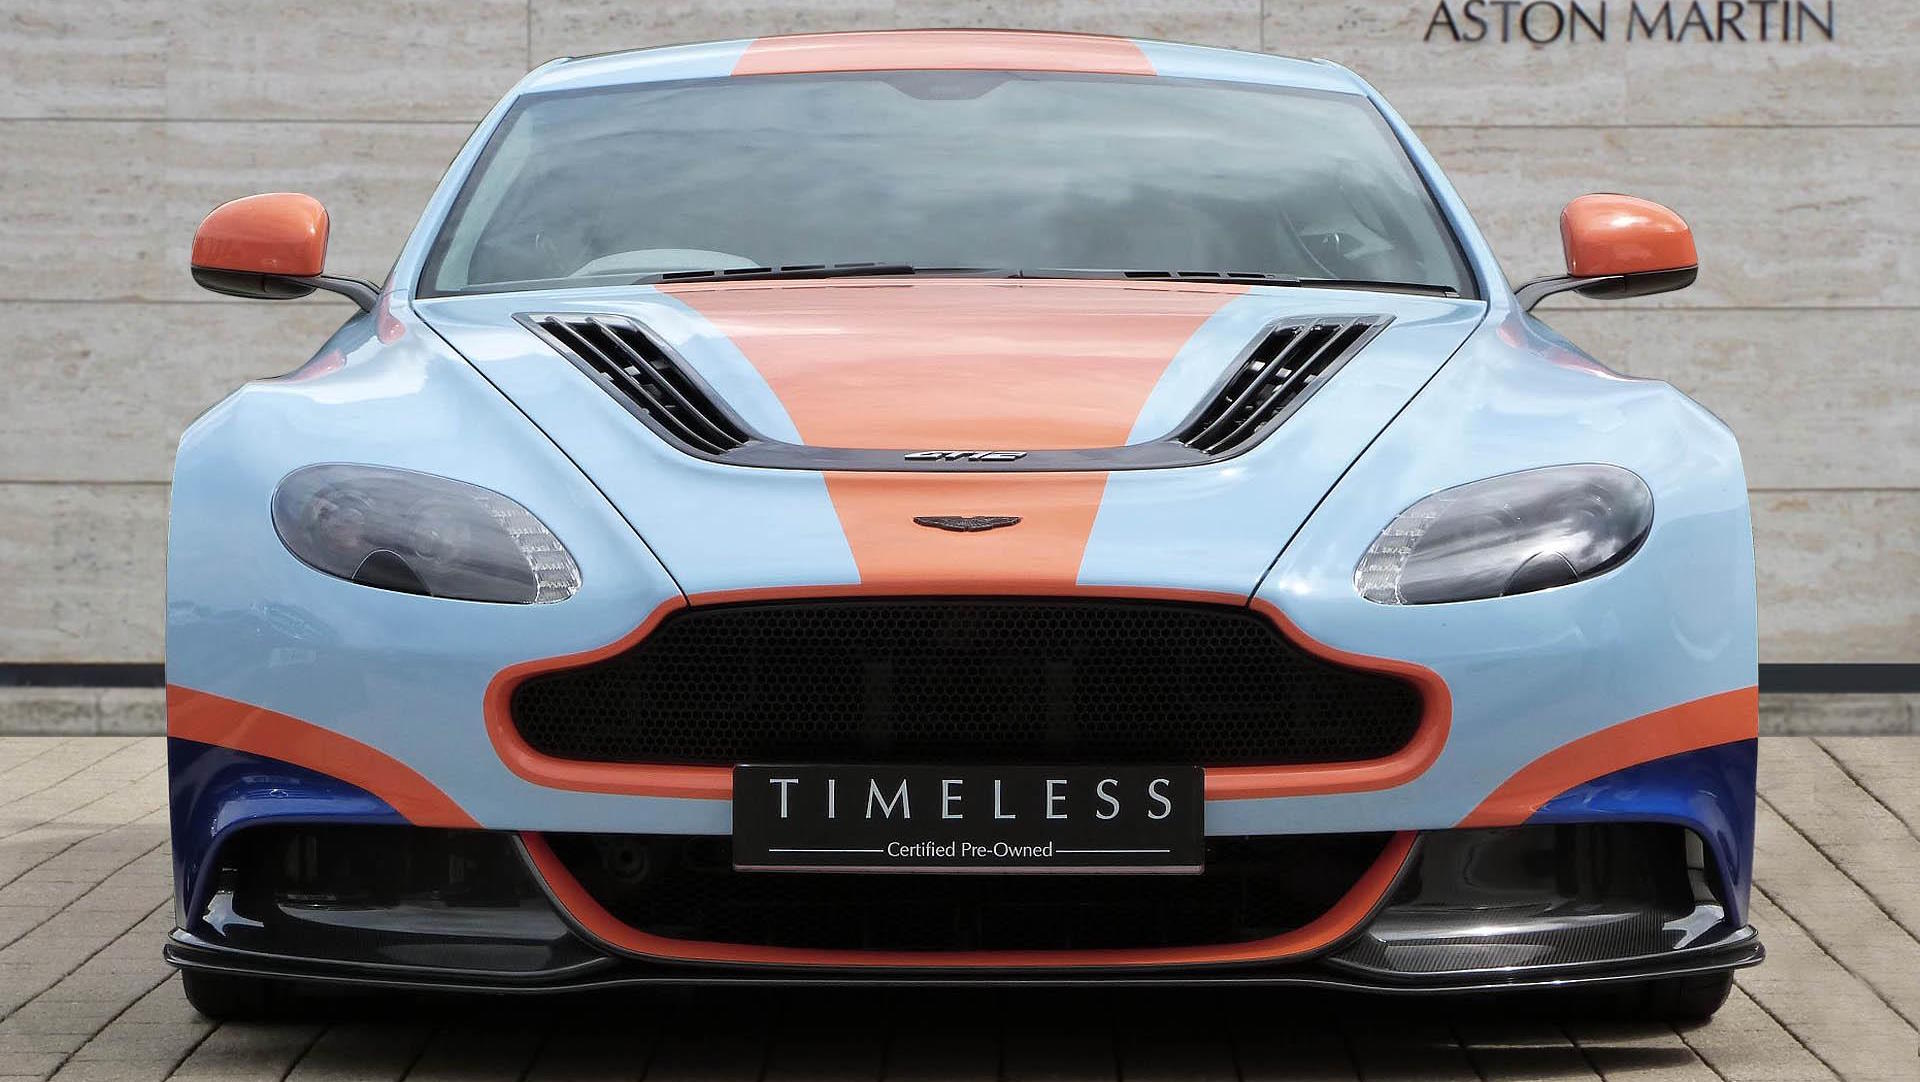 One of the World’s Rarest Modern Aston Martins Is For Sale